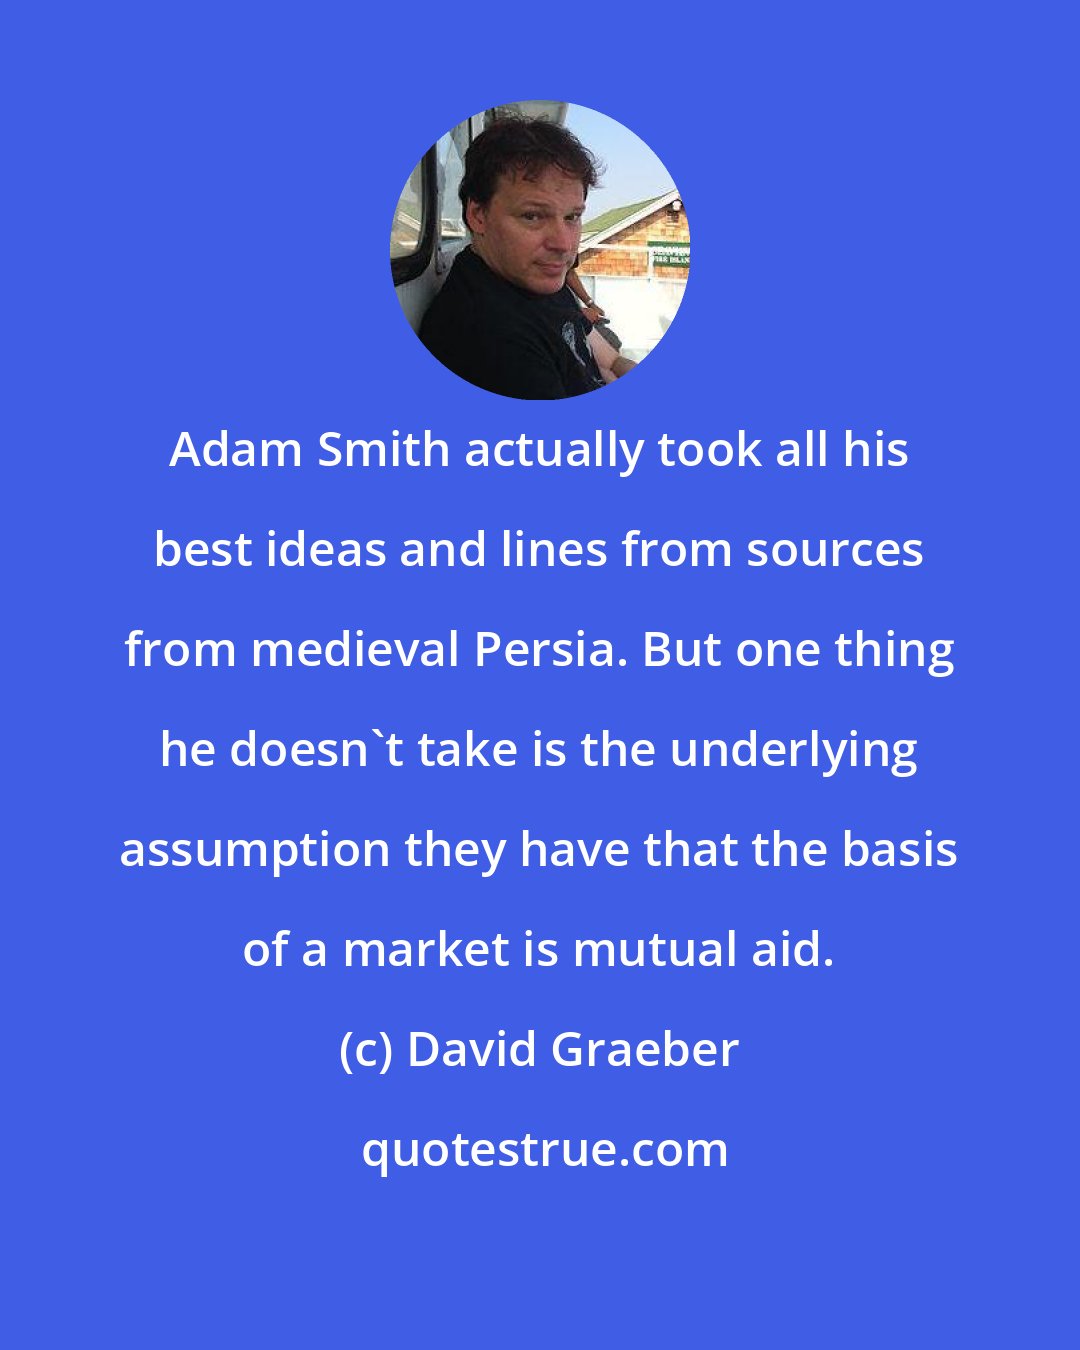 David Graeber: Adam Smith actually took all his best ideas and lines from sources from medieval Persia. But one thing he doesn't take is the underlying assumption they have that the basis of a market is mutual aid.